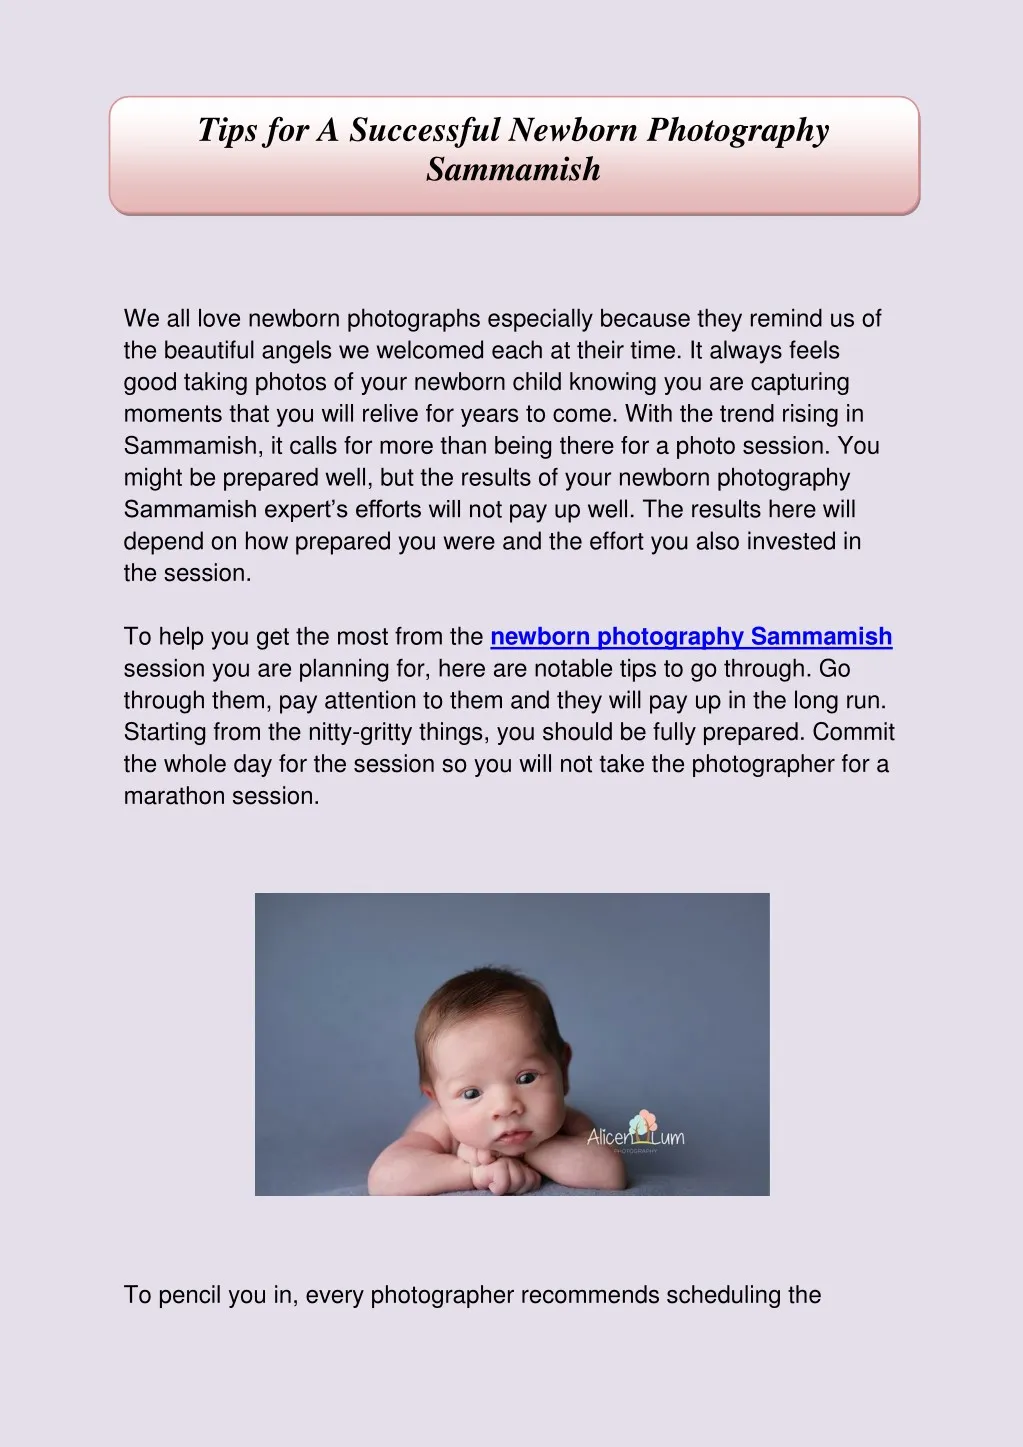 tips for a successful newborn photography